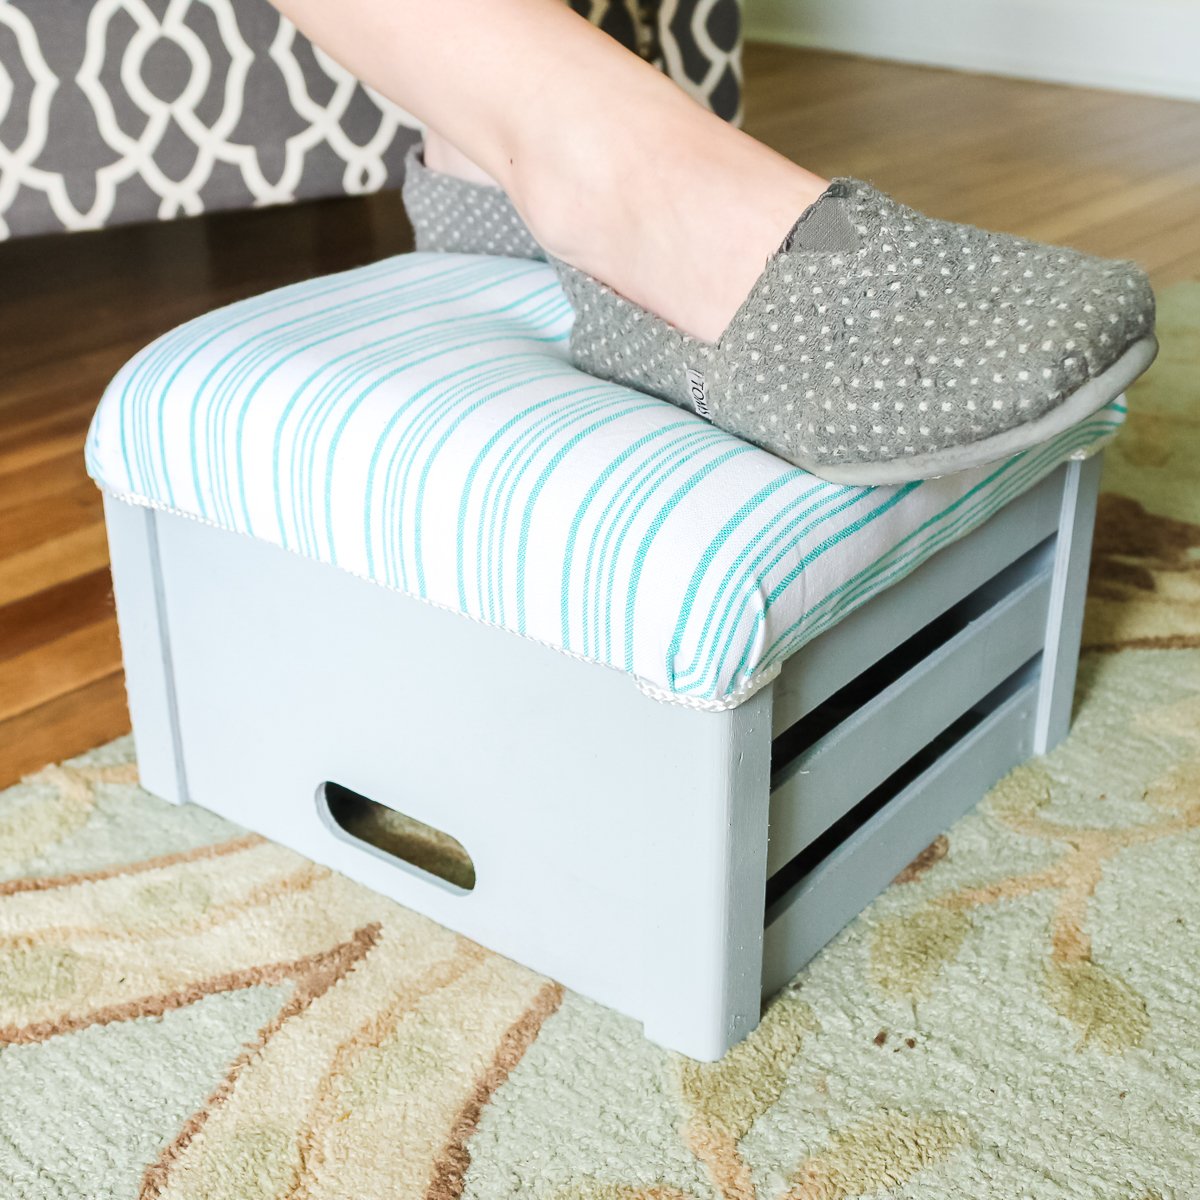 https://www.thecountrychiccottage.net/wp-content/uploads/2015/08/diy-footstool-15-of-16.jpg